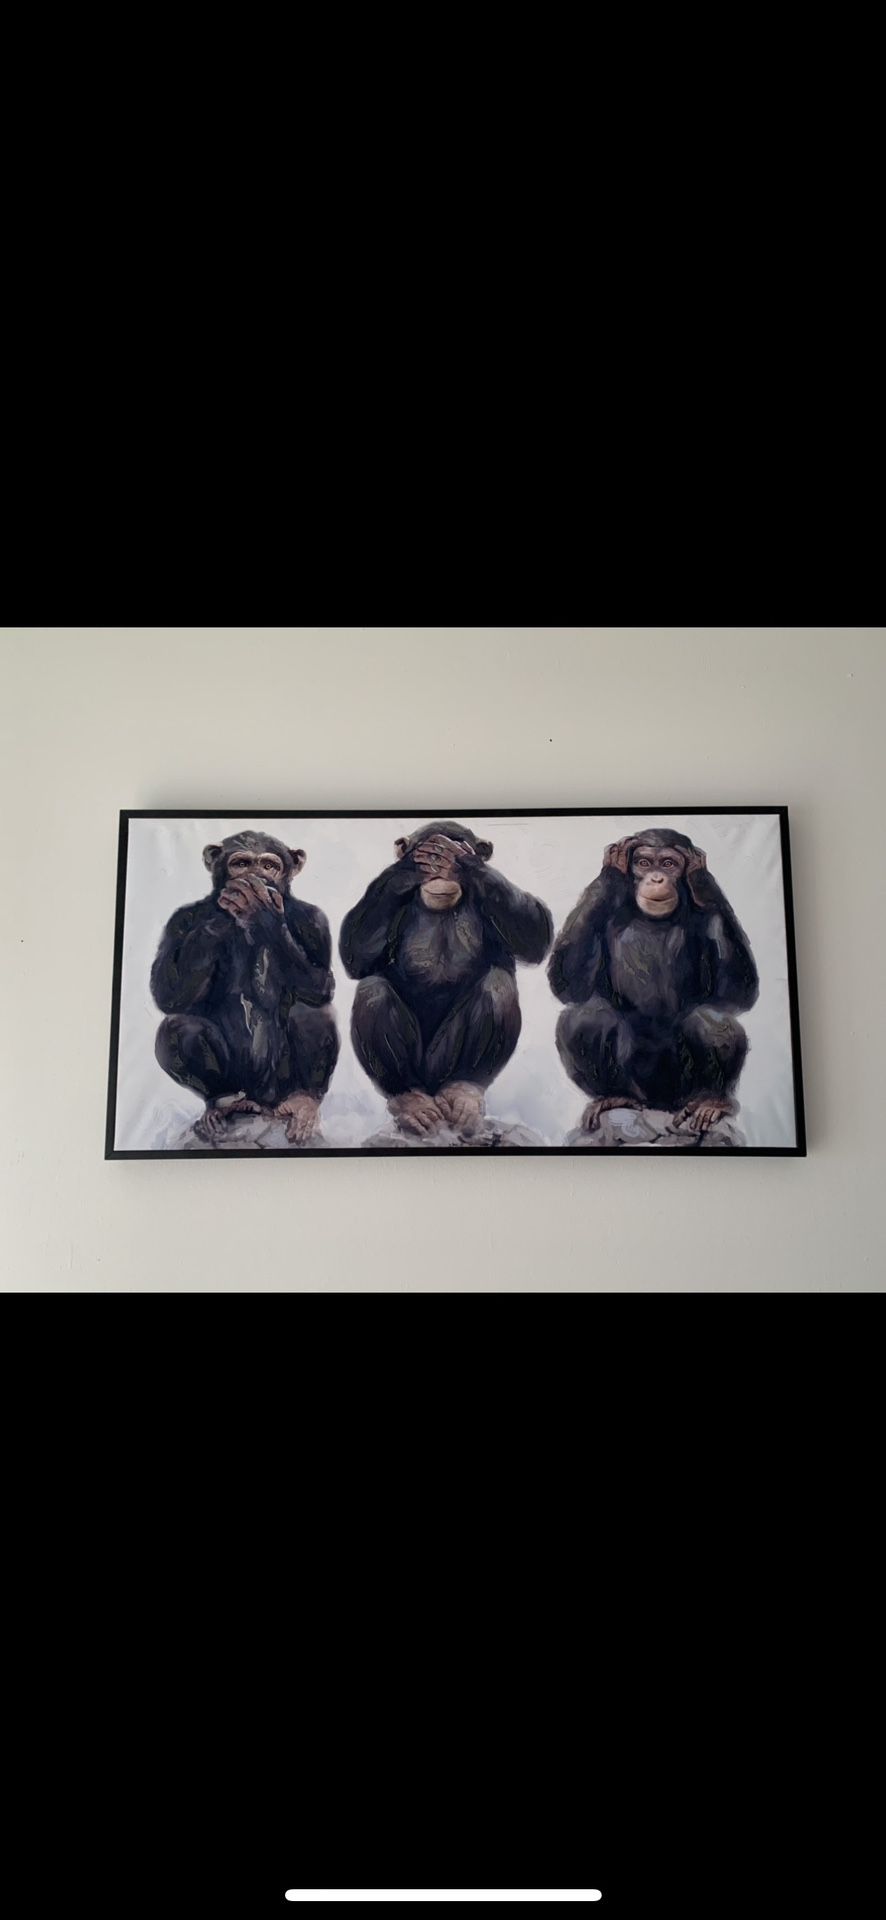 43x23 Appx Three Wise Monkeys See No Evil Hear No Evil Speaks no Evil  Reflective Paint 